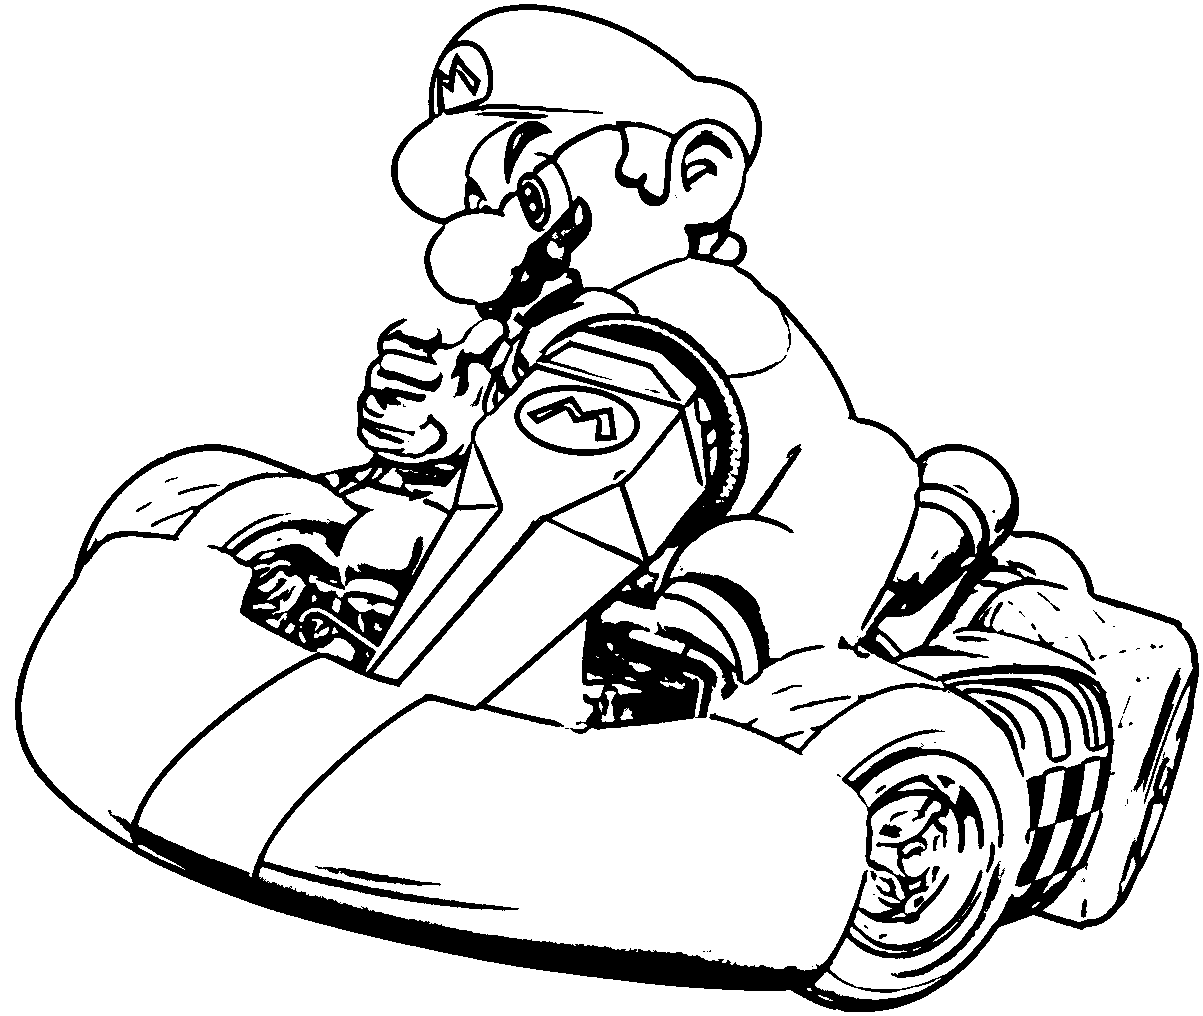 Mario Kart 8 Coloring Pages Coloring Home